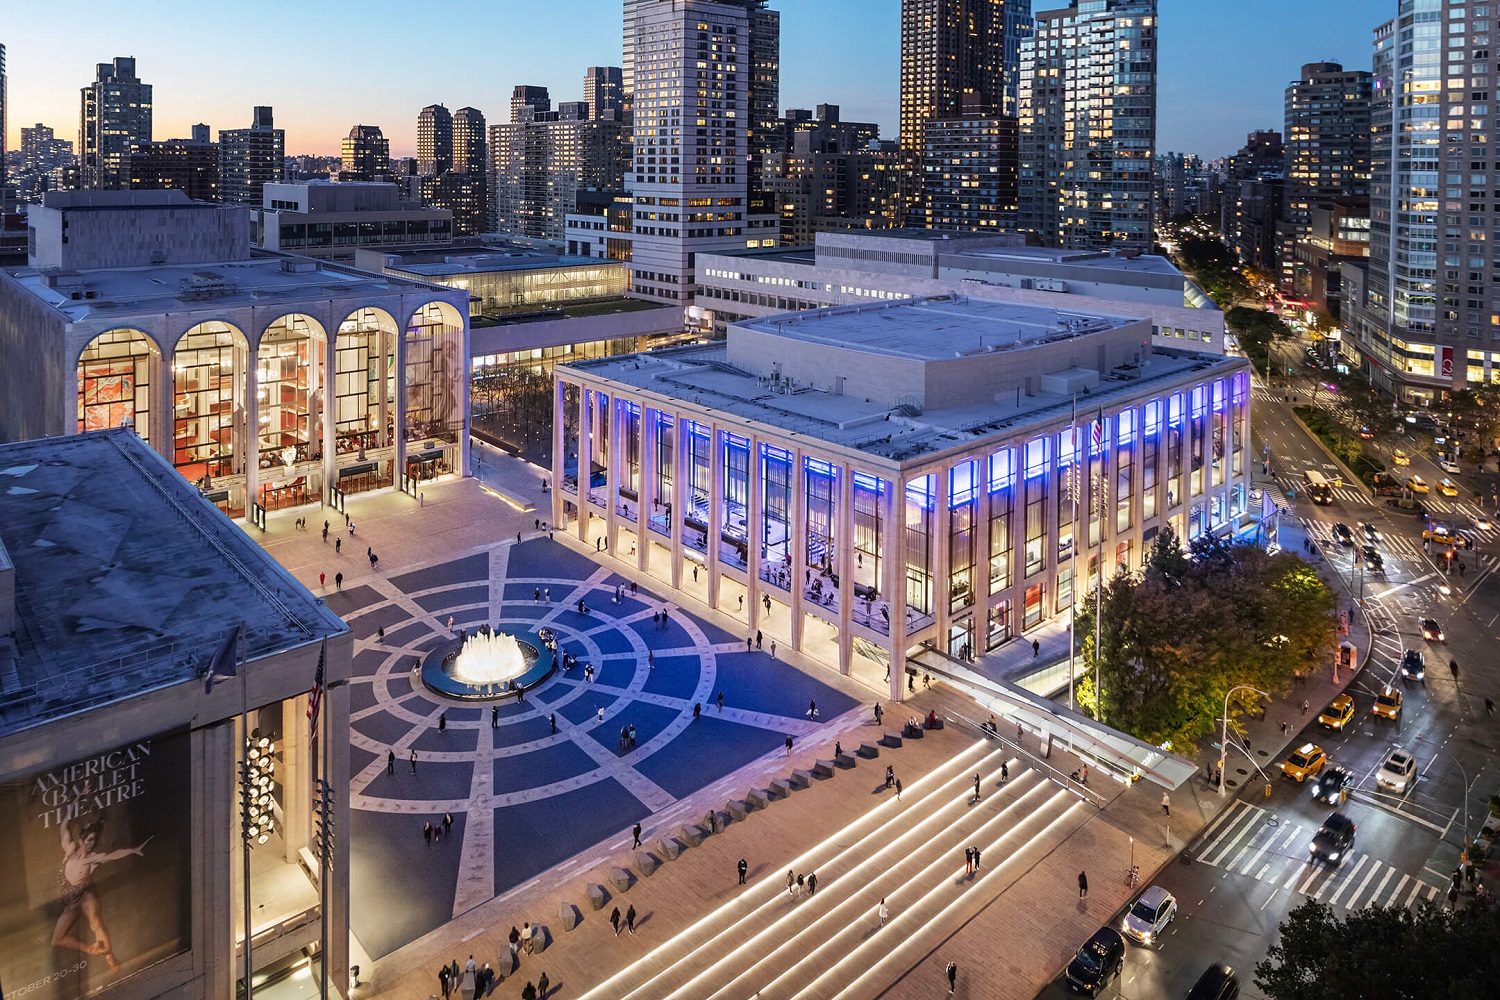 Exteriors Image of David Geffen Hall at Lincoln Center